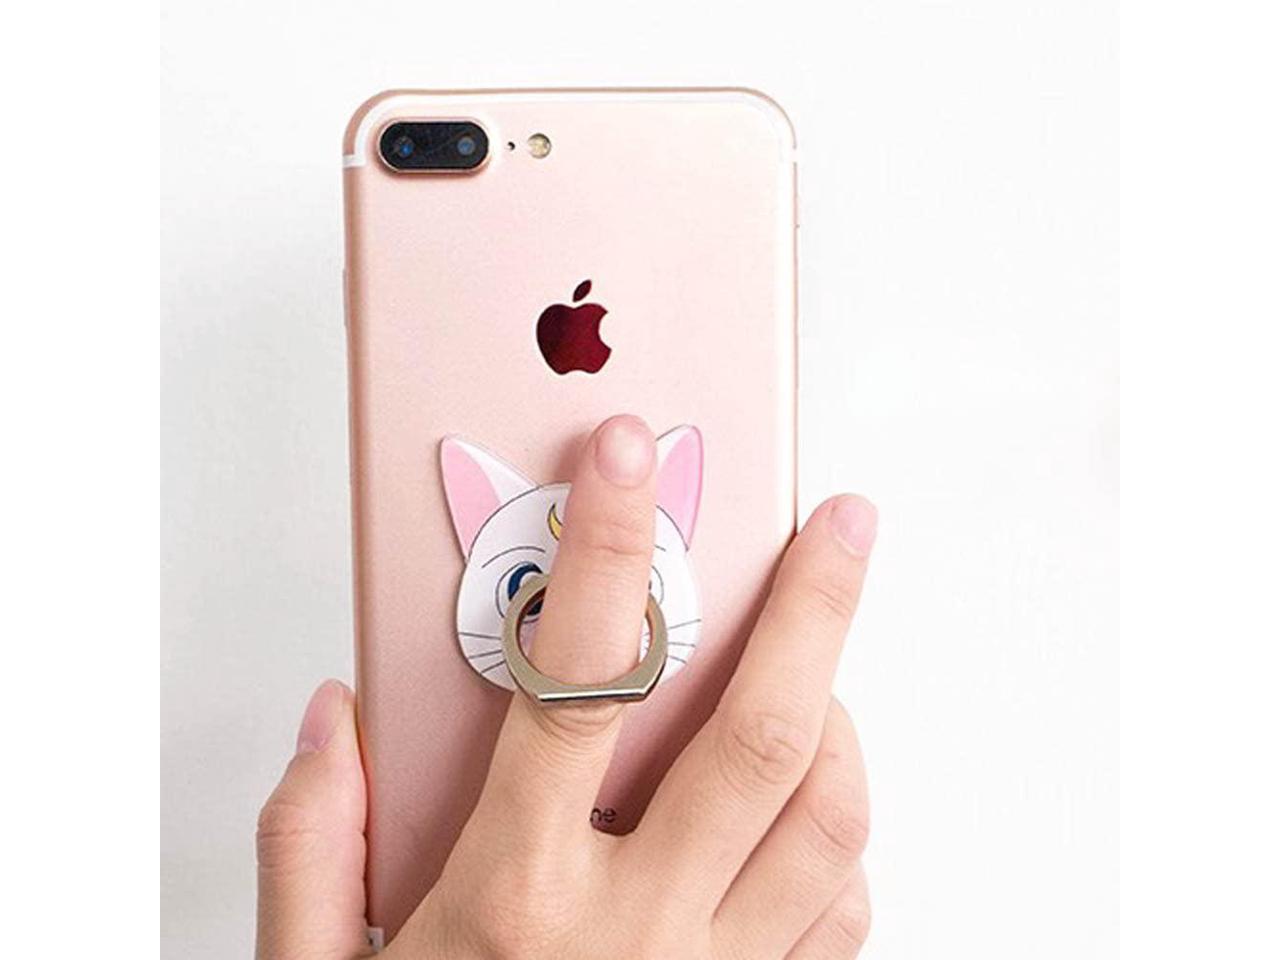 2pcs Moon Cats 2pcs Phone Ring Grip Sailor Moon Black White Cat Luna Universal 360° Adjustable Holder Case Stand Mount Kickstand Compatible with All iPhones Samsung Android iPad Tablet TM ZOEAST 